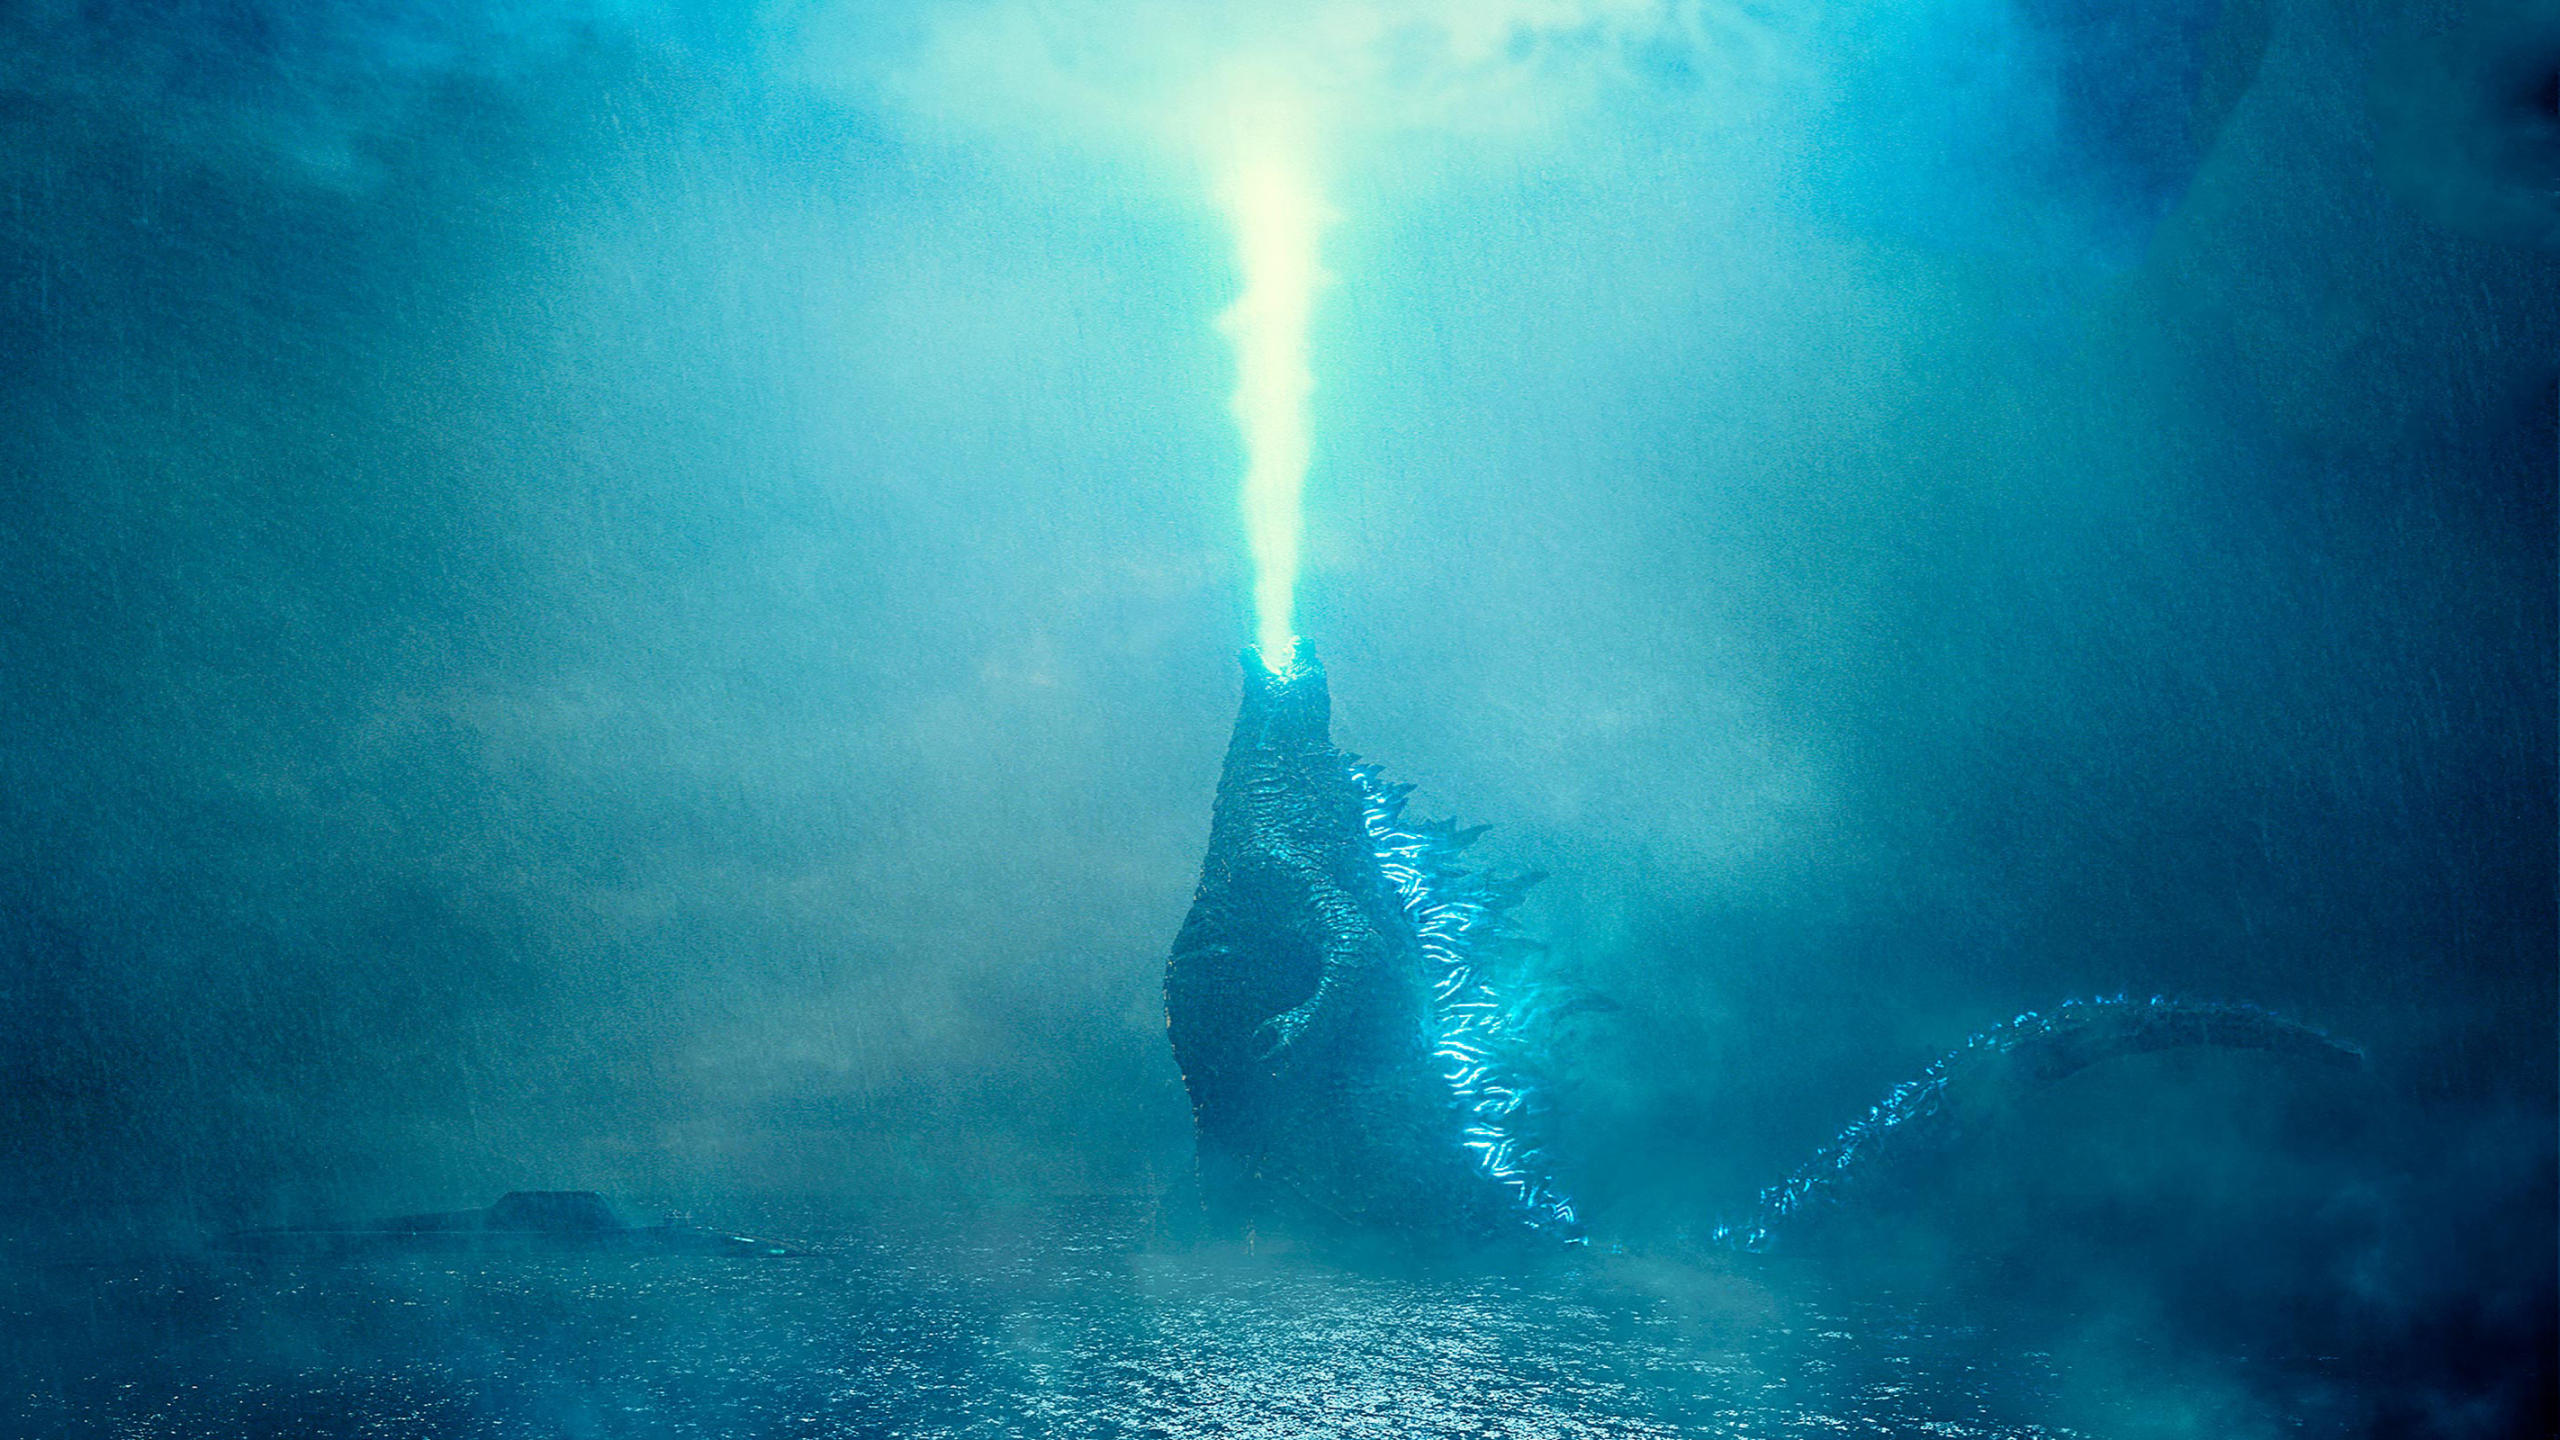 godzilla 2 king of the monsters download for free